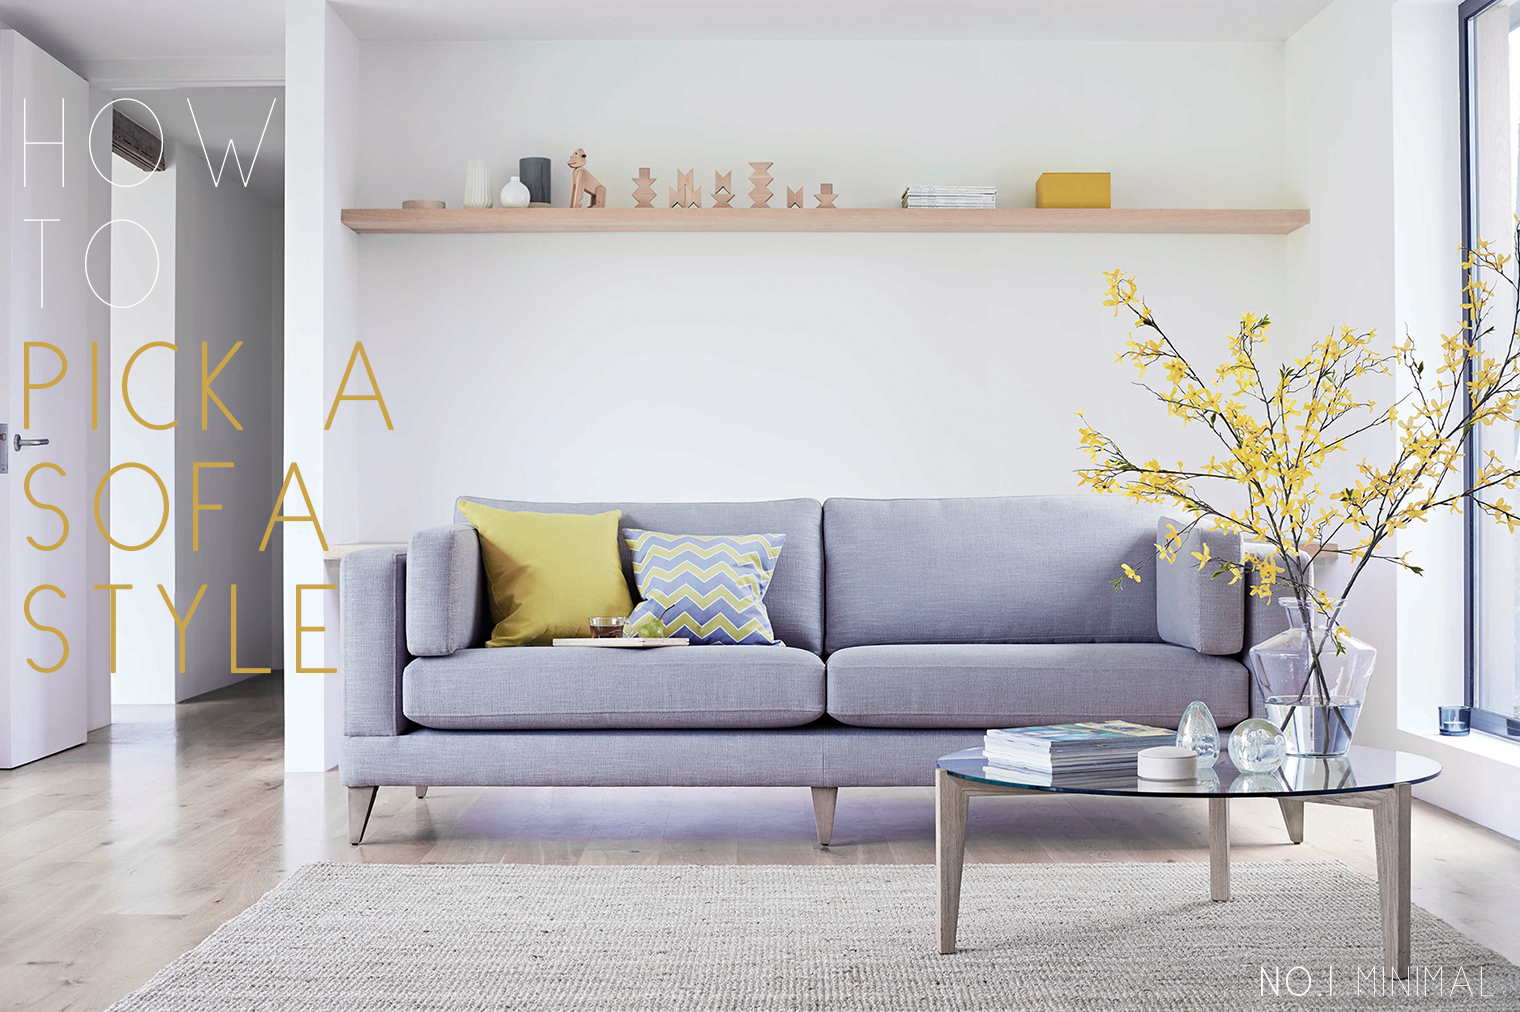 How To Pick A Sofa For Your Style: The Lounge Co.